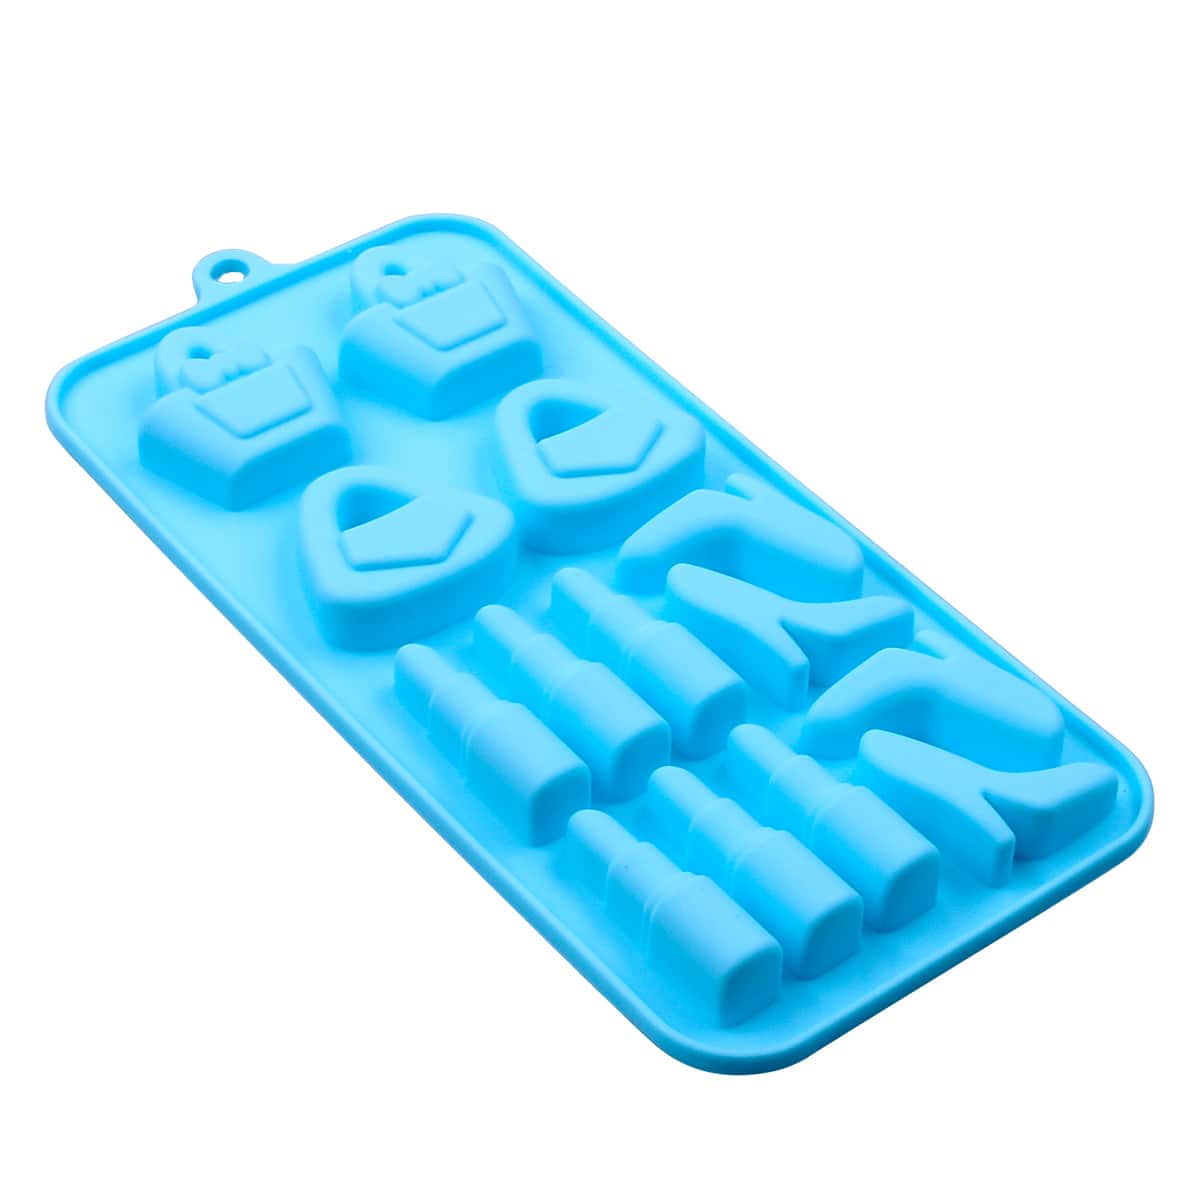 Buy the Fashion Silicone Candy Mold by Celebrate It® at Michaels